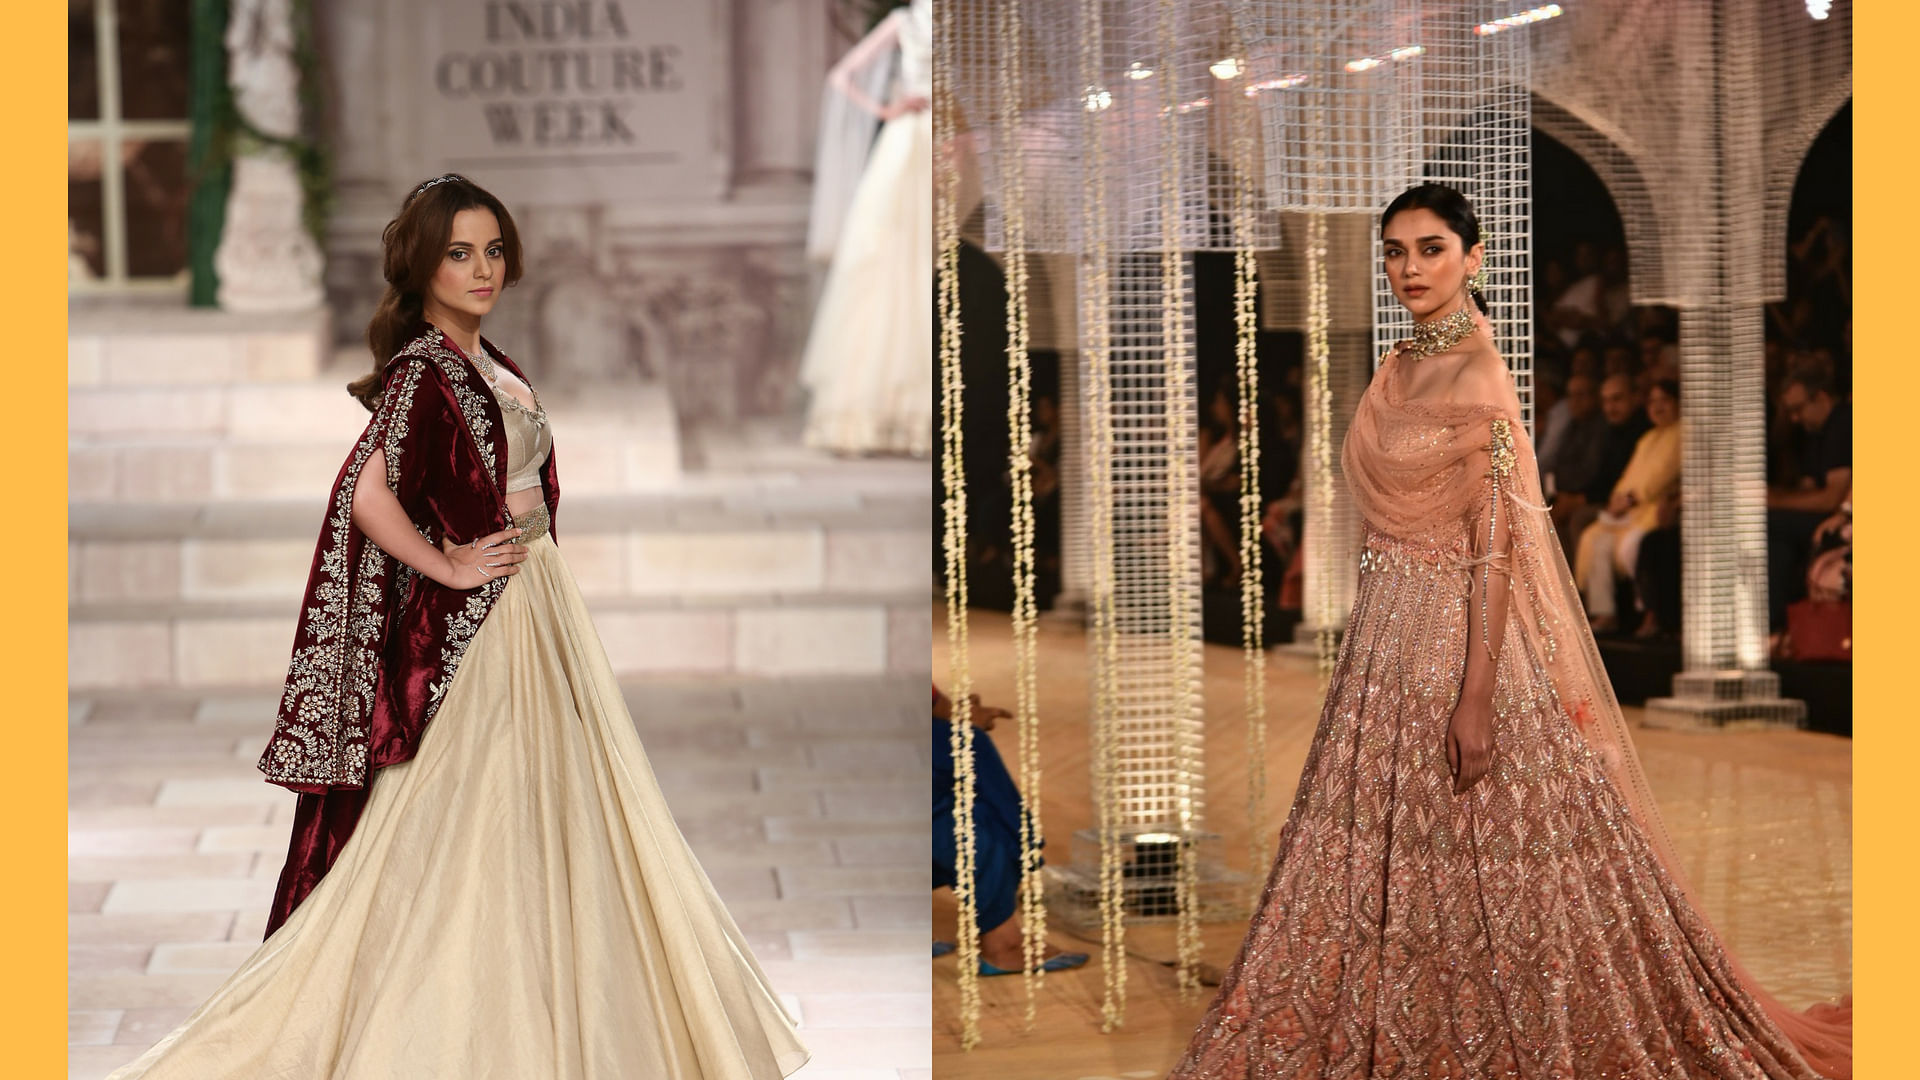 Kangana Ranaut and Aditi Rao Hydari were the showstoppers on Day 1 of the India Couture Week 2018.